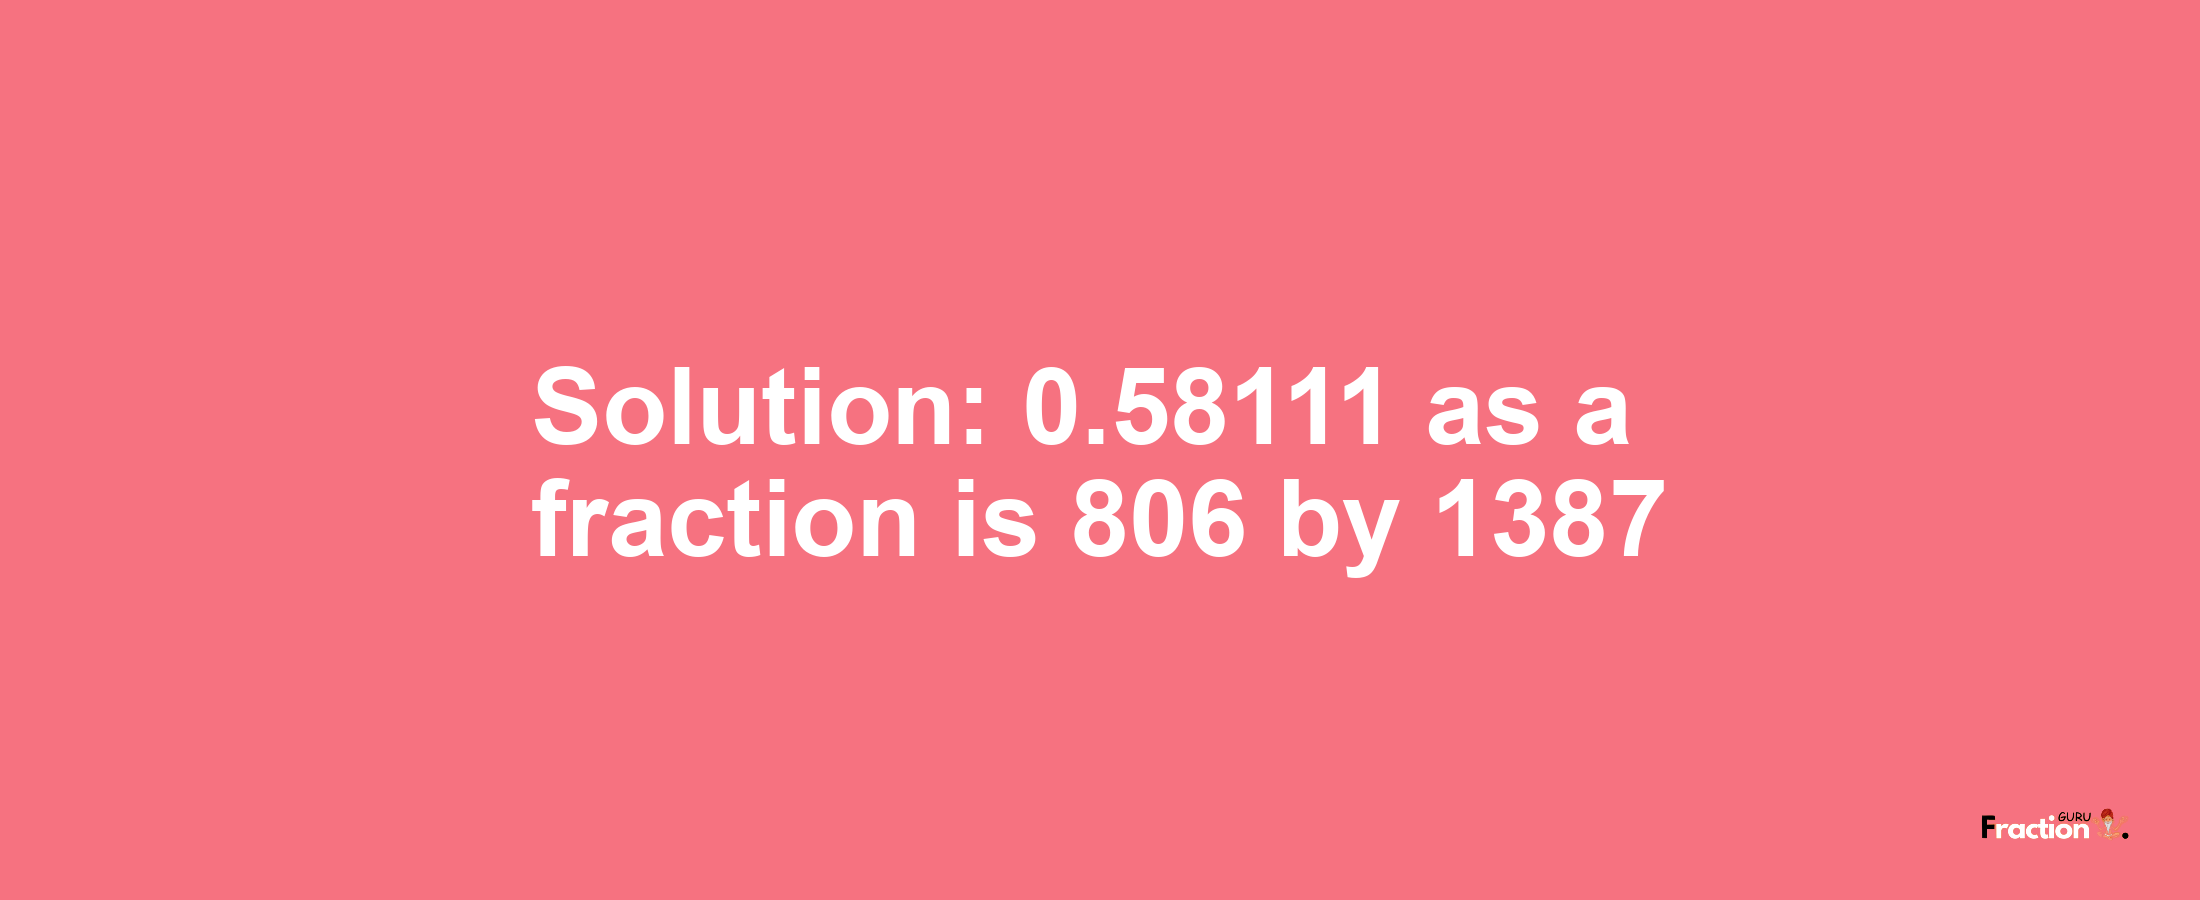 Solution:0.58111 as a fraction is 806/1387